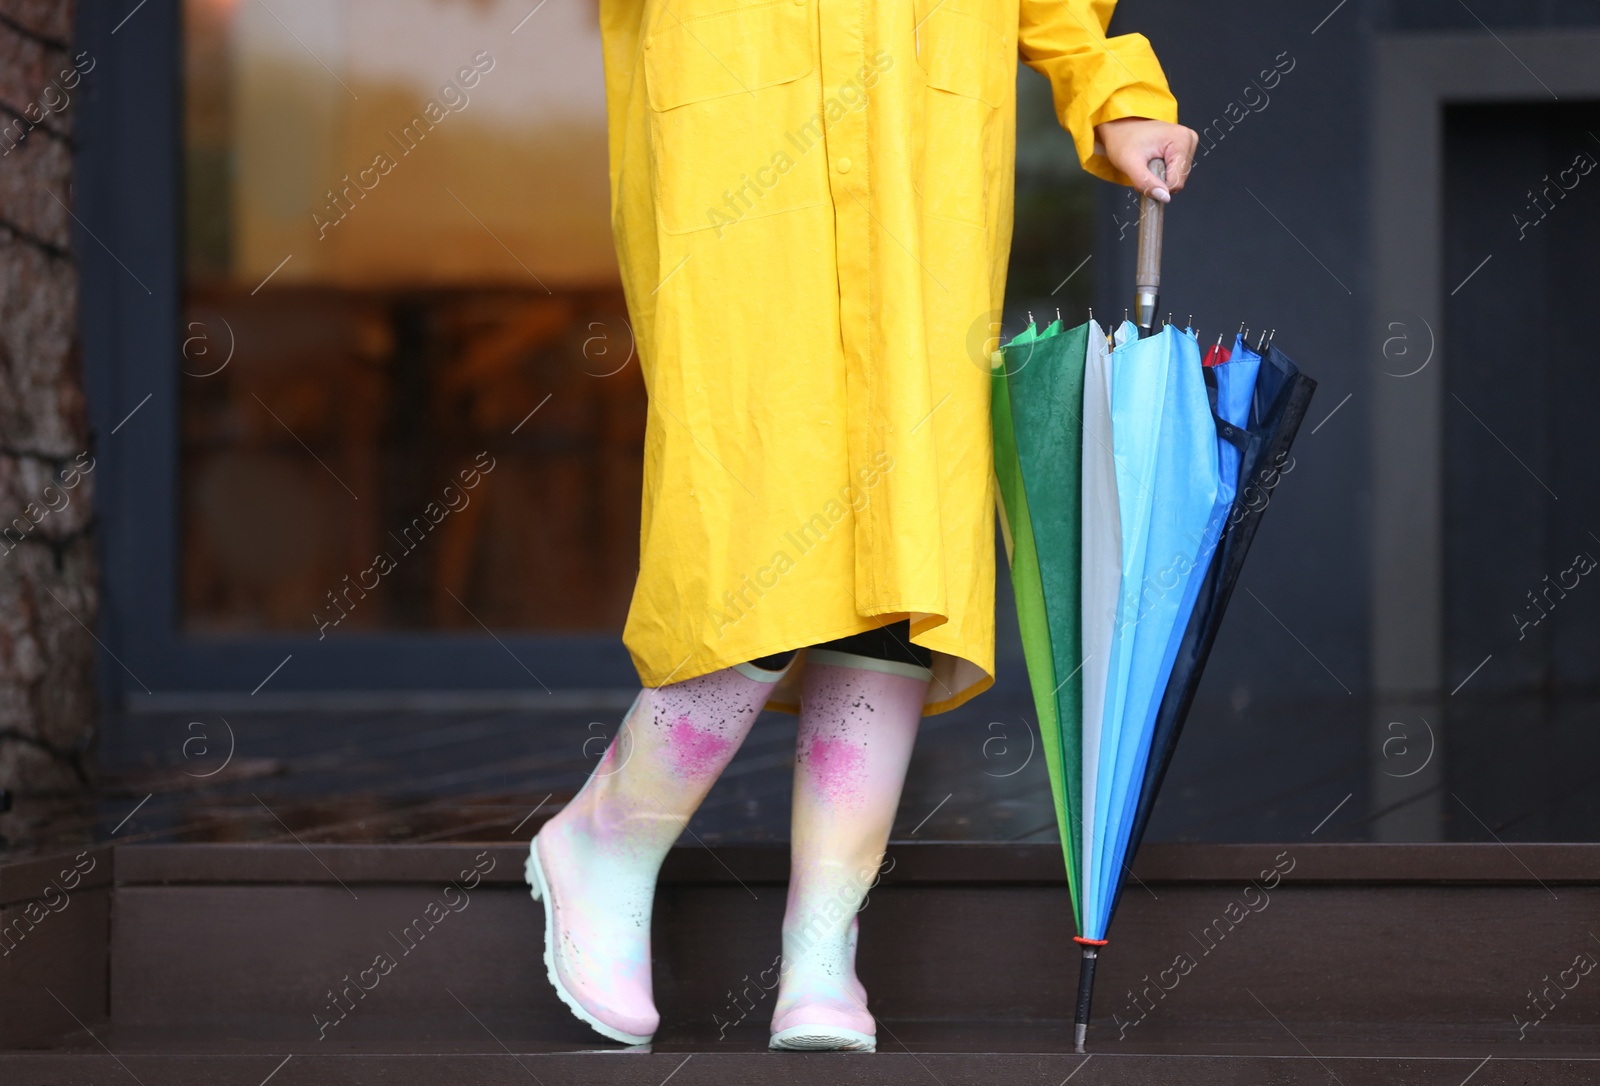 Image of Woman wearing raincoat and rubber boots holding umbrella outdoors, closeup